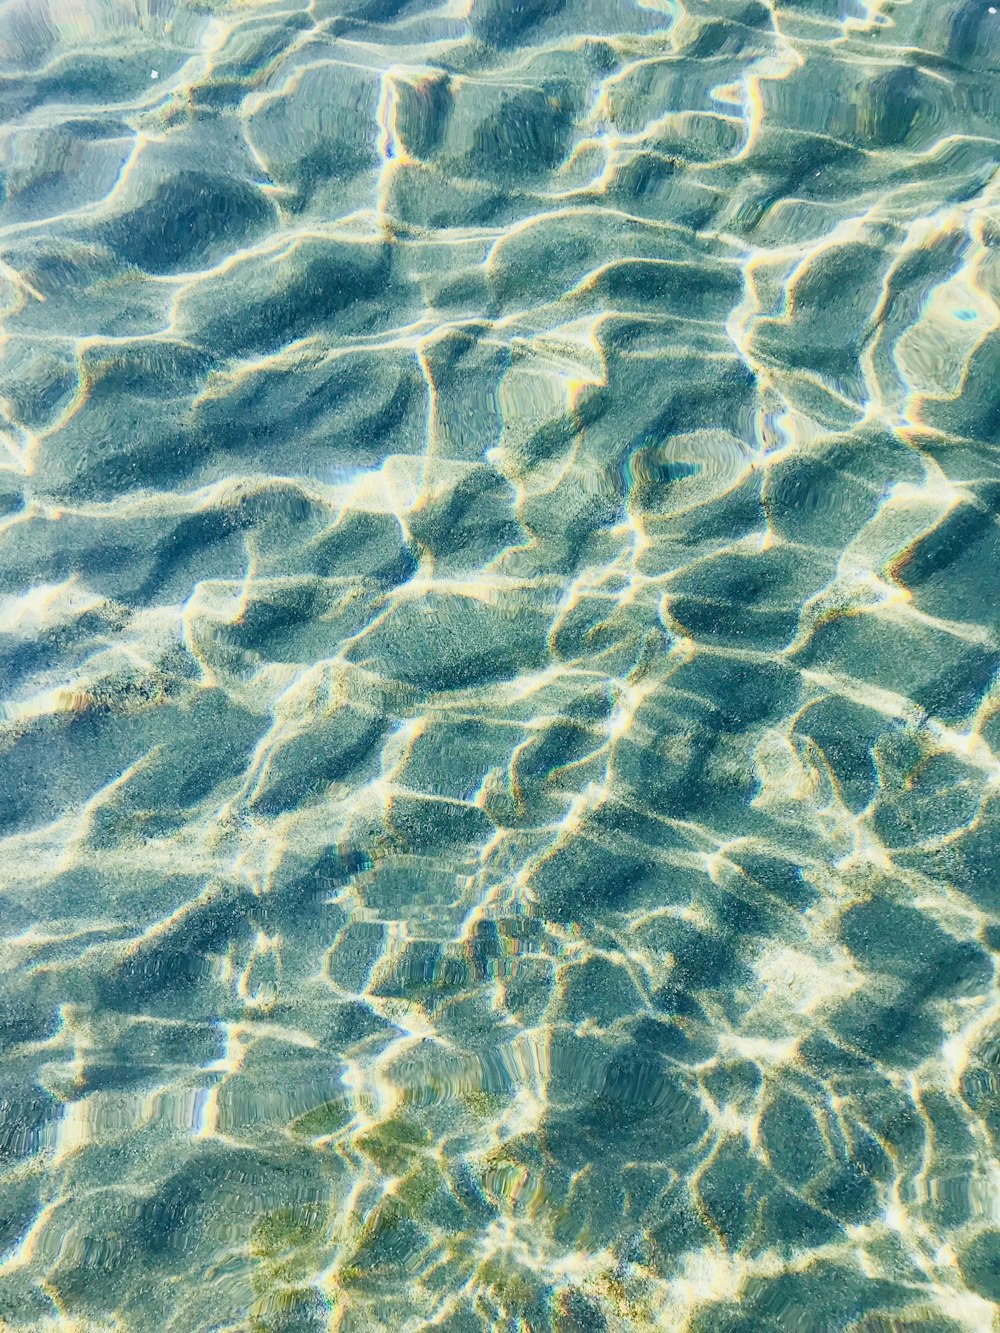 a close up of a body of water with ripples